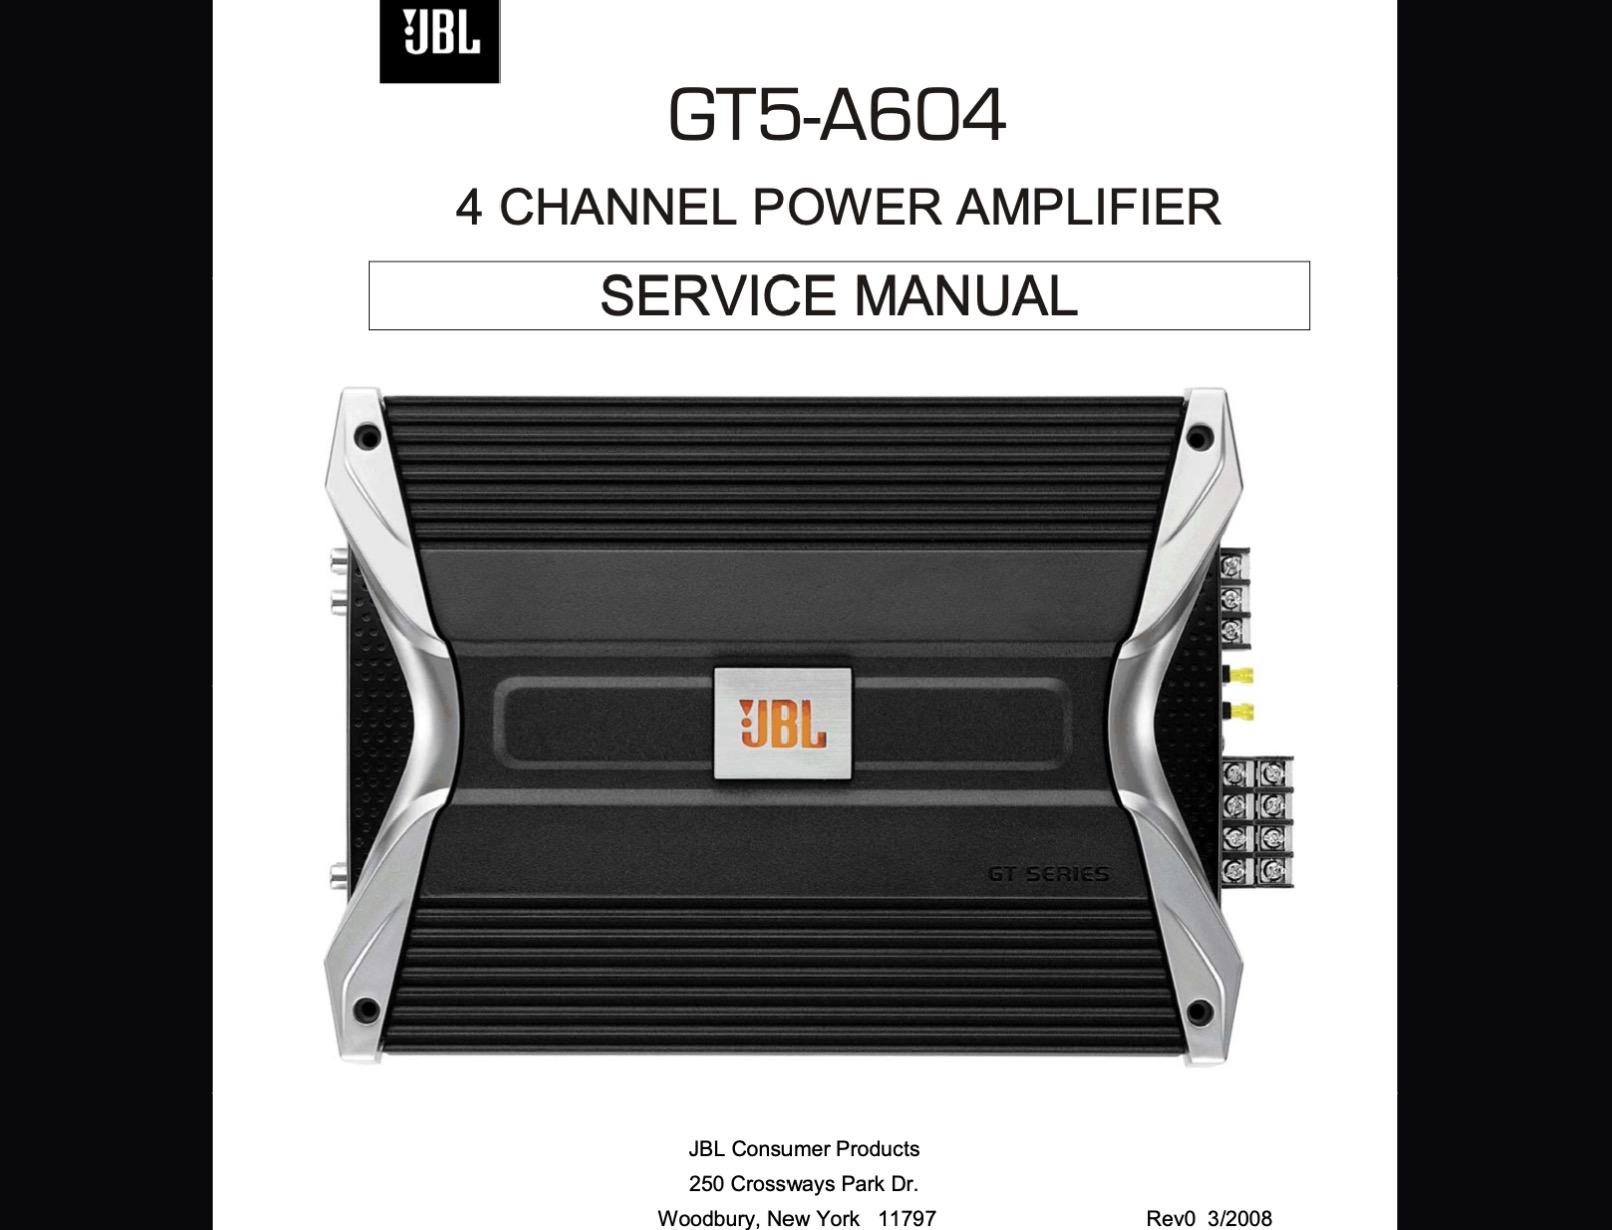 JBL GT5-A604 4 CHANNEL POWER AMPLIFIER  Service Manual, Exploded View, Schematic Diagram, Cirquit Board